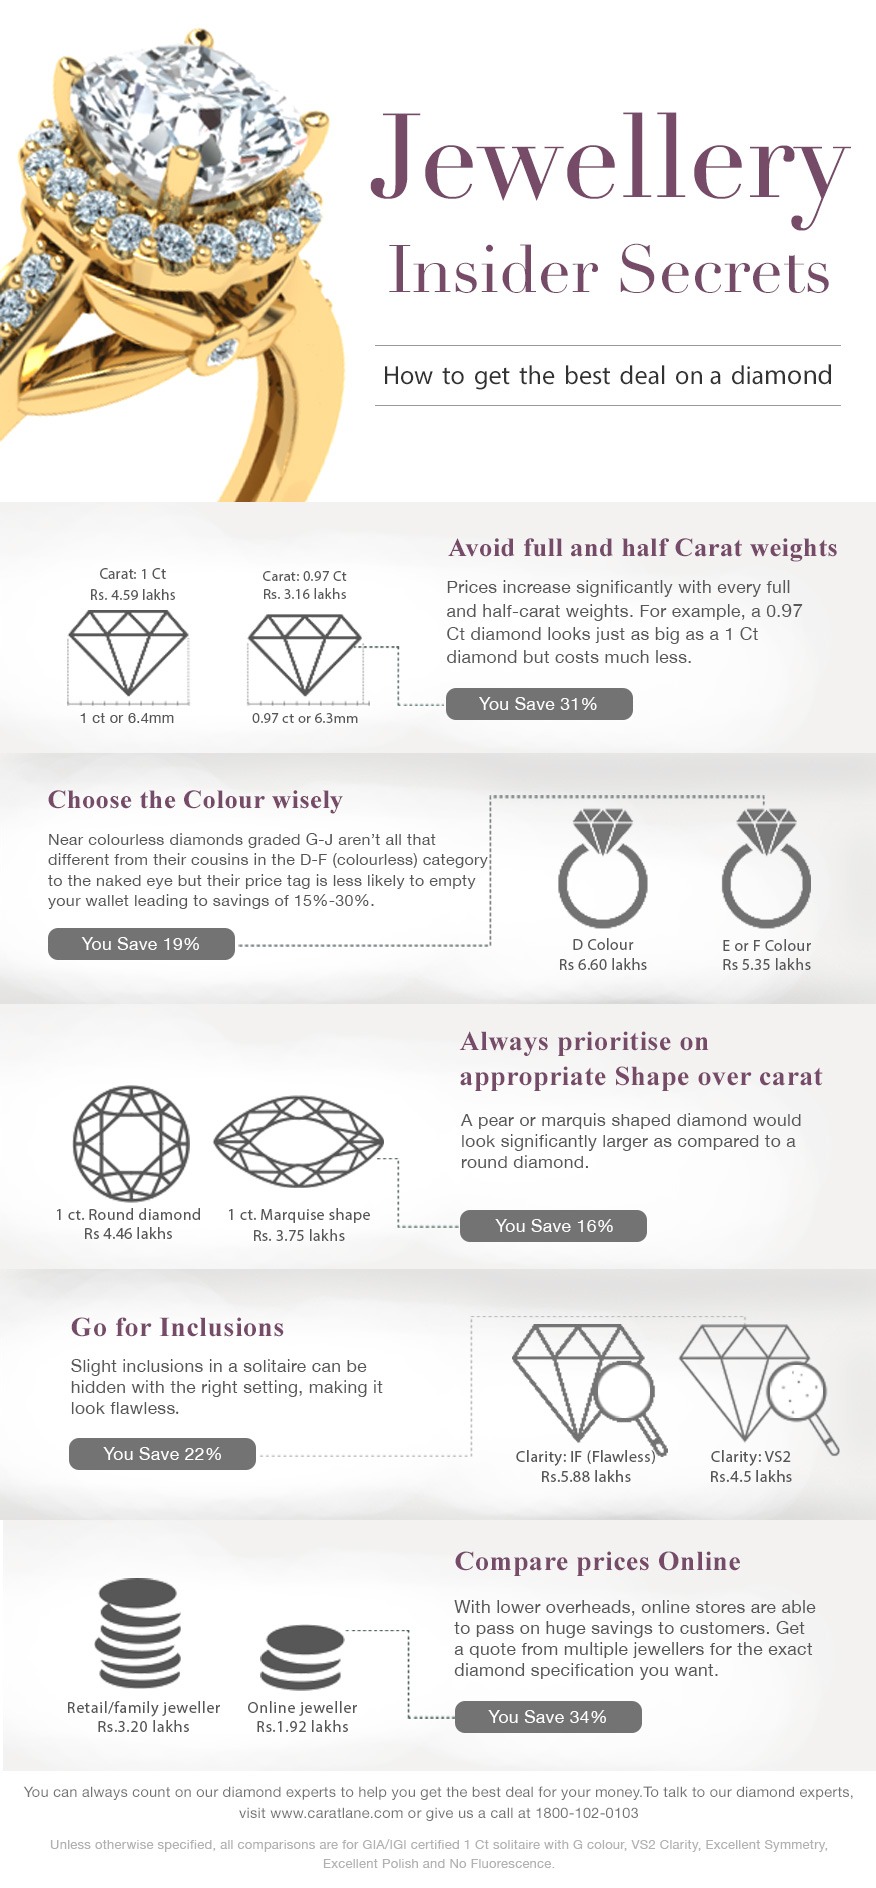 Our Best Kept Secrets Revealed: Get the Best Bling for Your Money - The ...